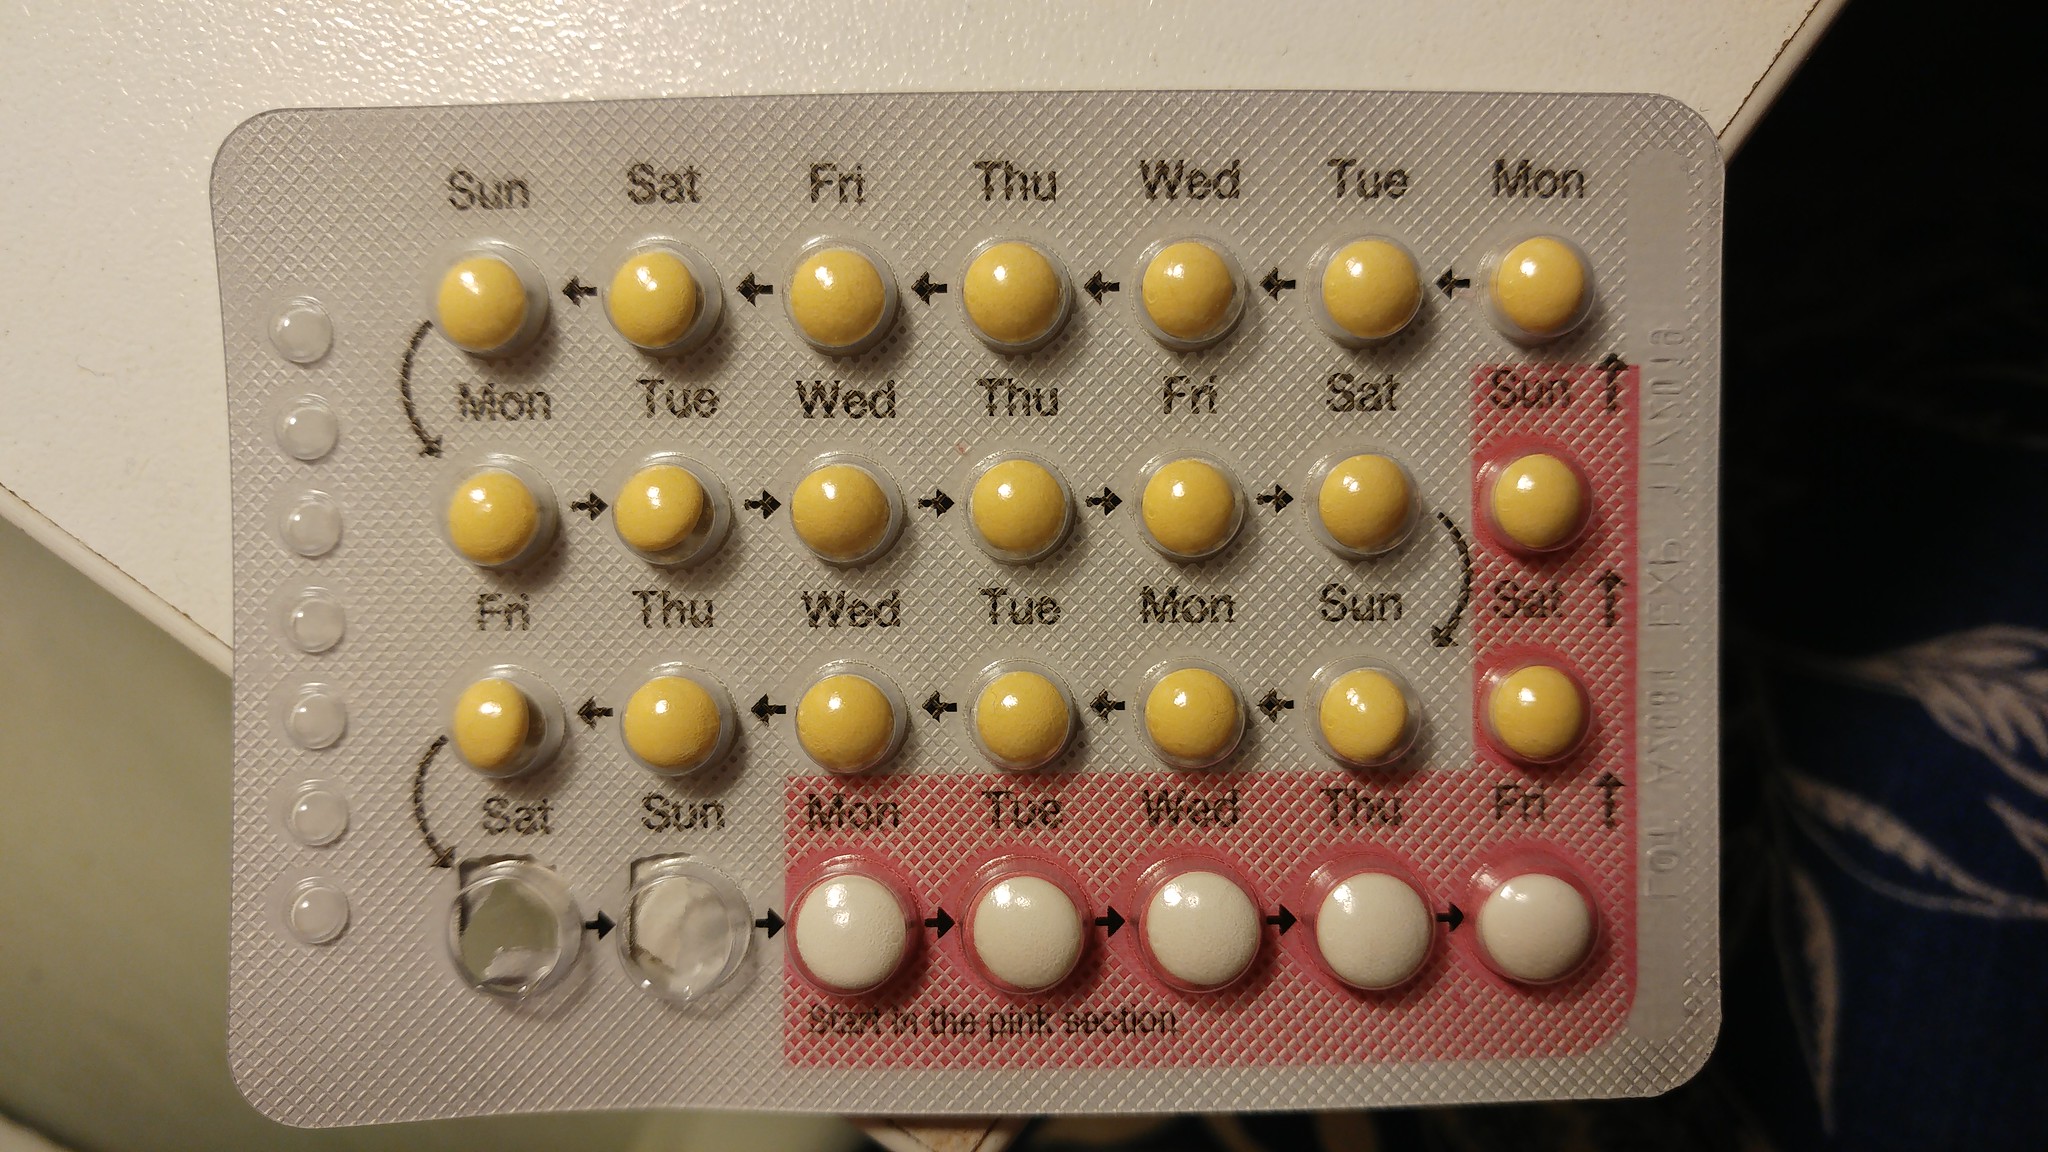 Study: Oral Birth Control Significantly Increases Women’s Depression Risk